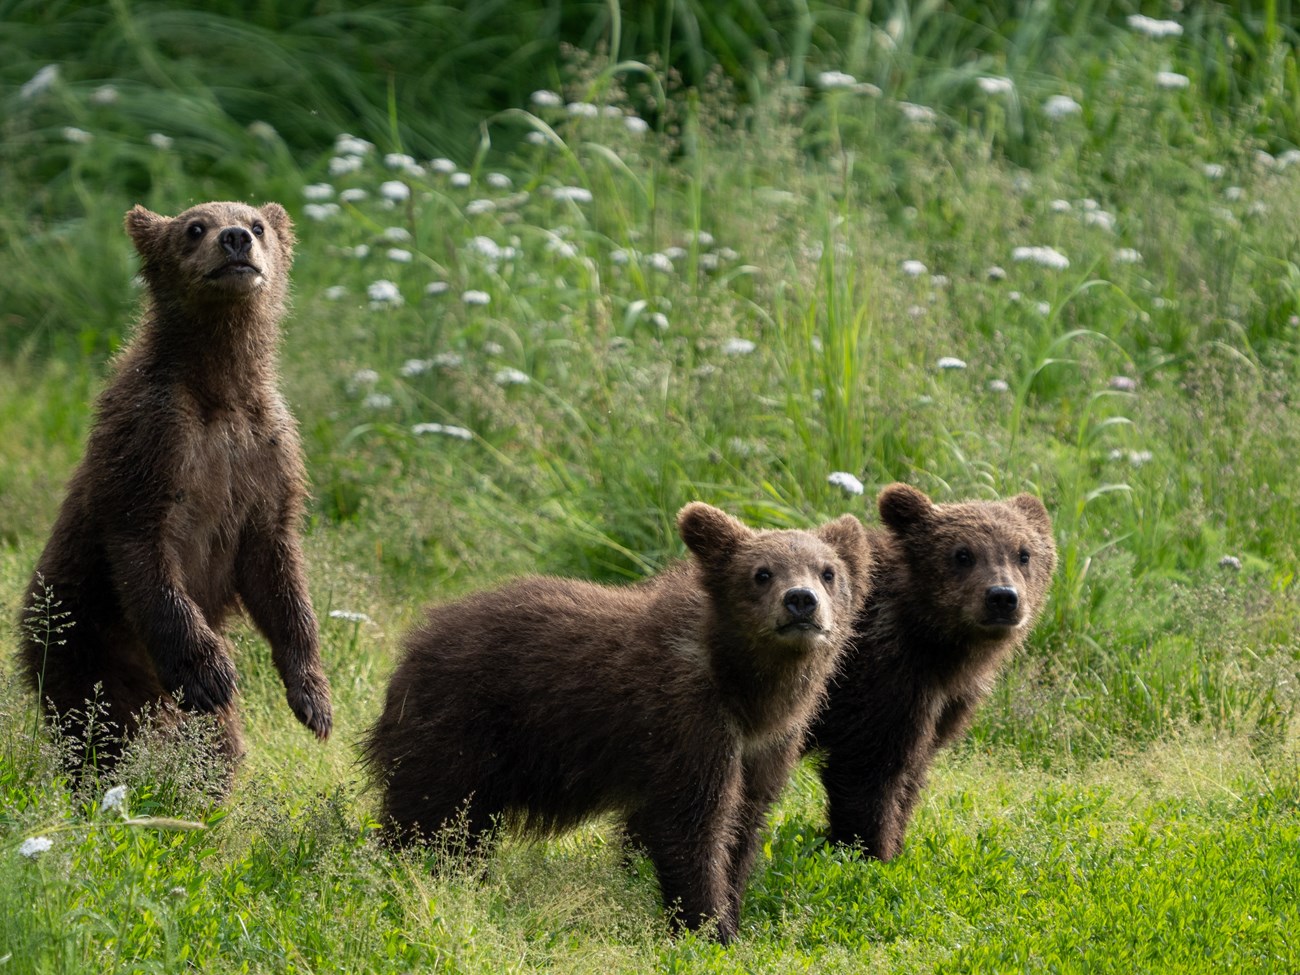 901's three spring cubs look at the camera, one is standing up.